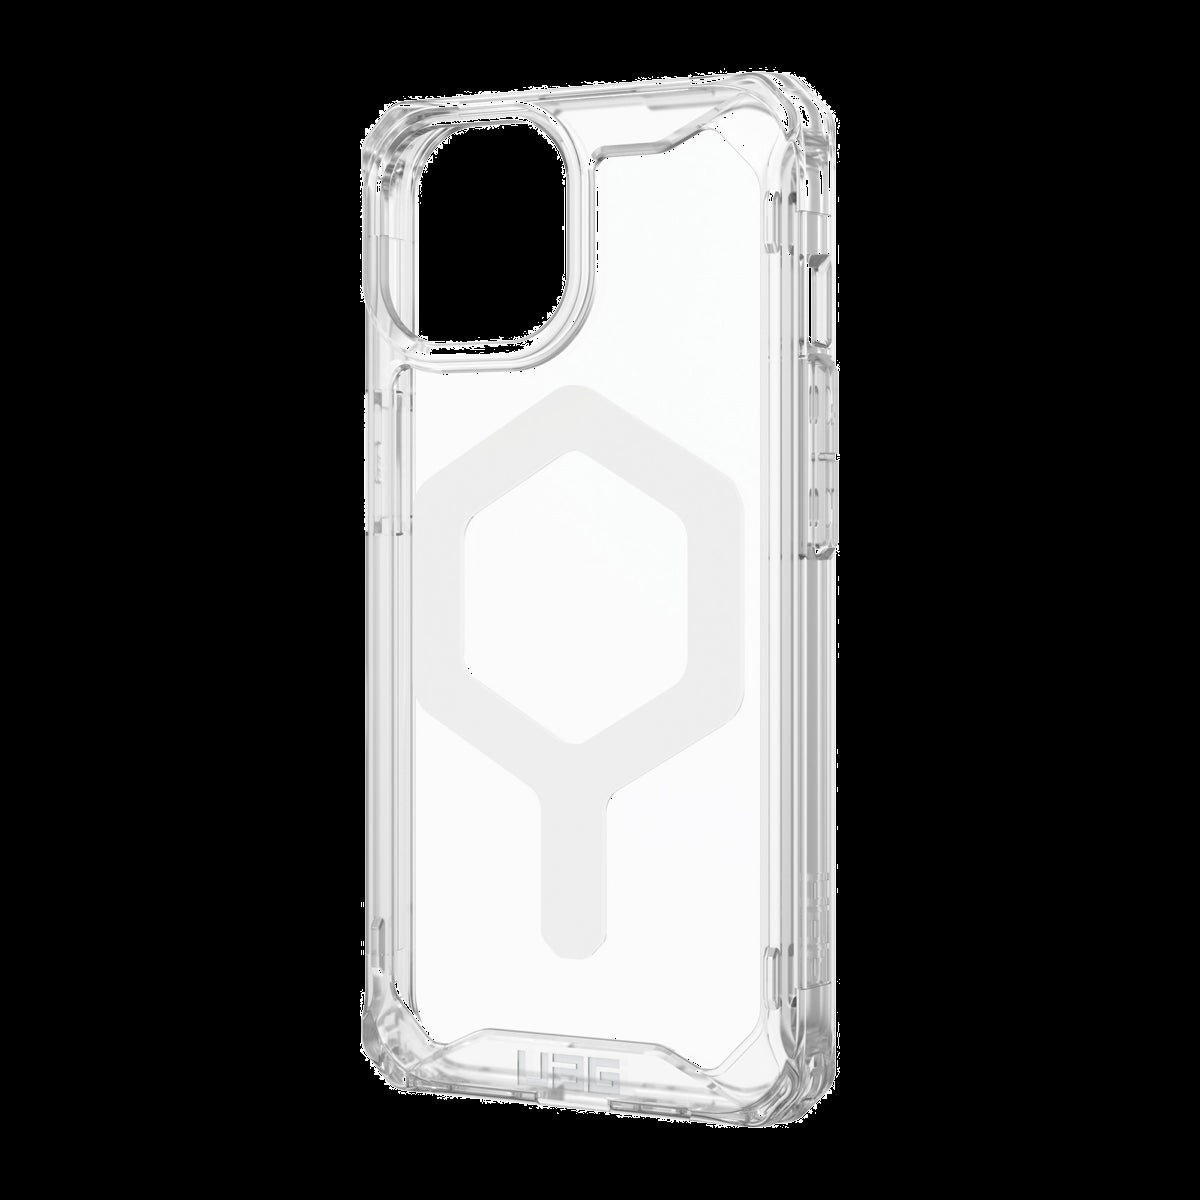 The UAG Plyo case combines reliable military-grade protection with a modern polished aesthetic creating beautiful everyday armor and security for your phone. Now compatible with MagSafe.